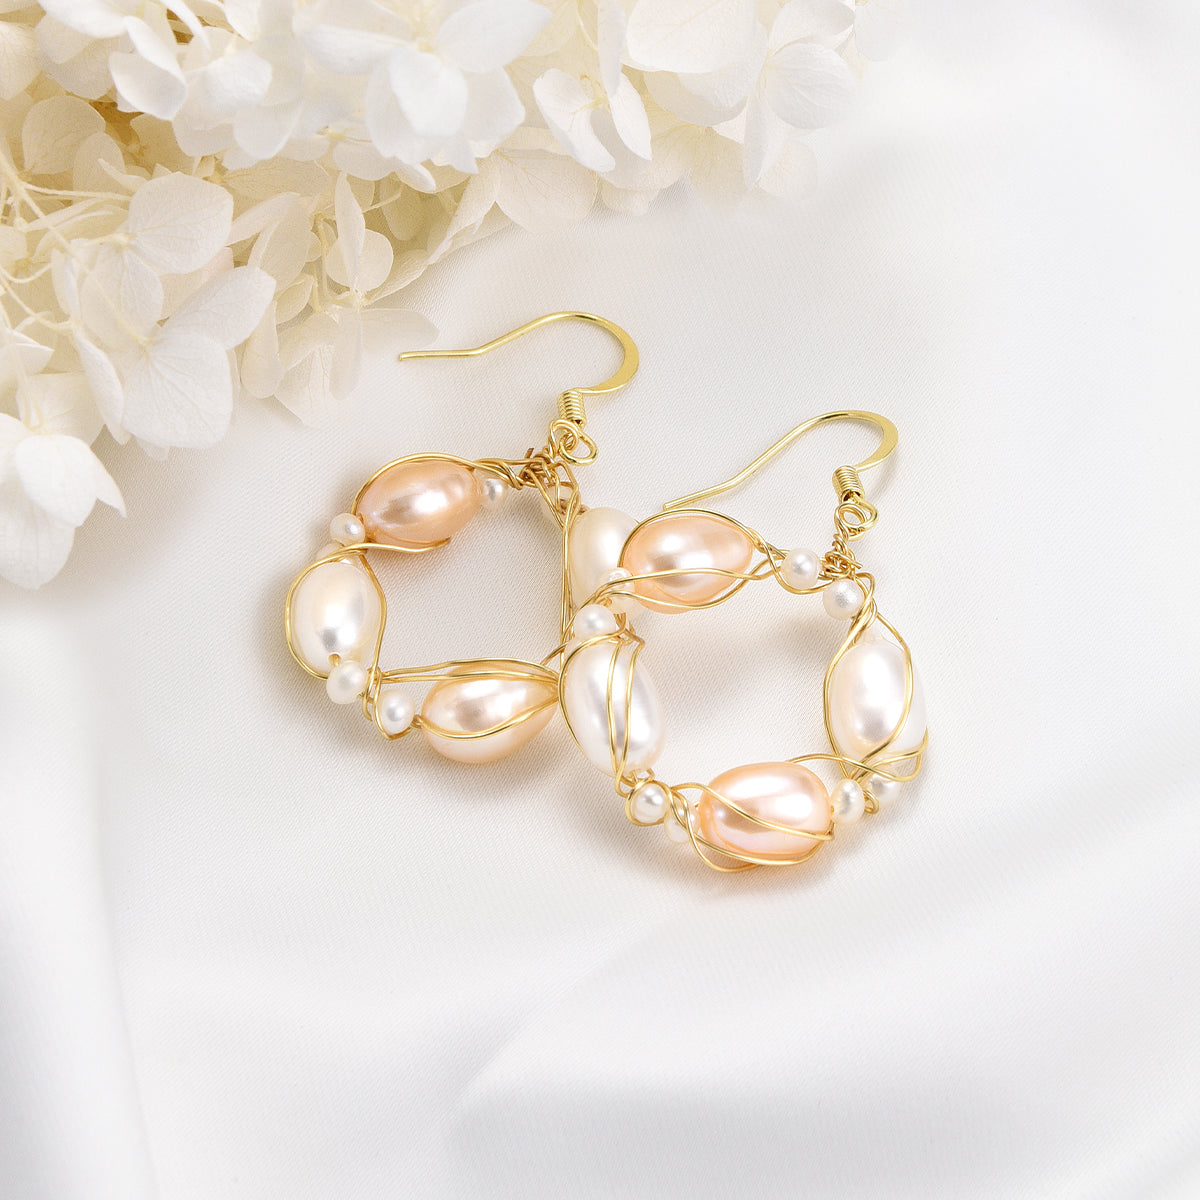 Peachy and white colored flower throne earrings